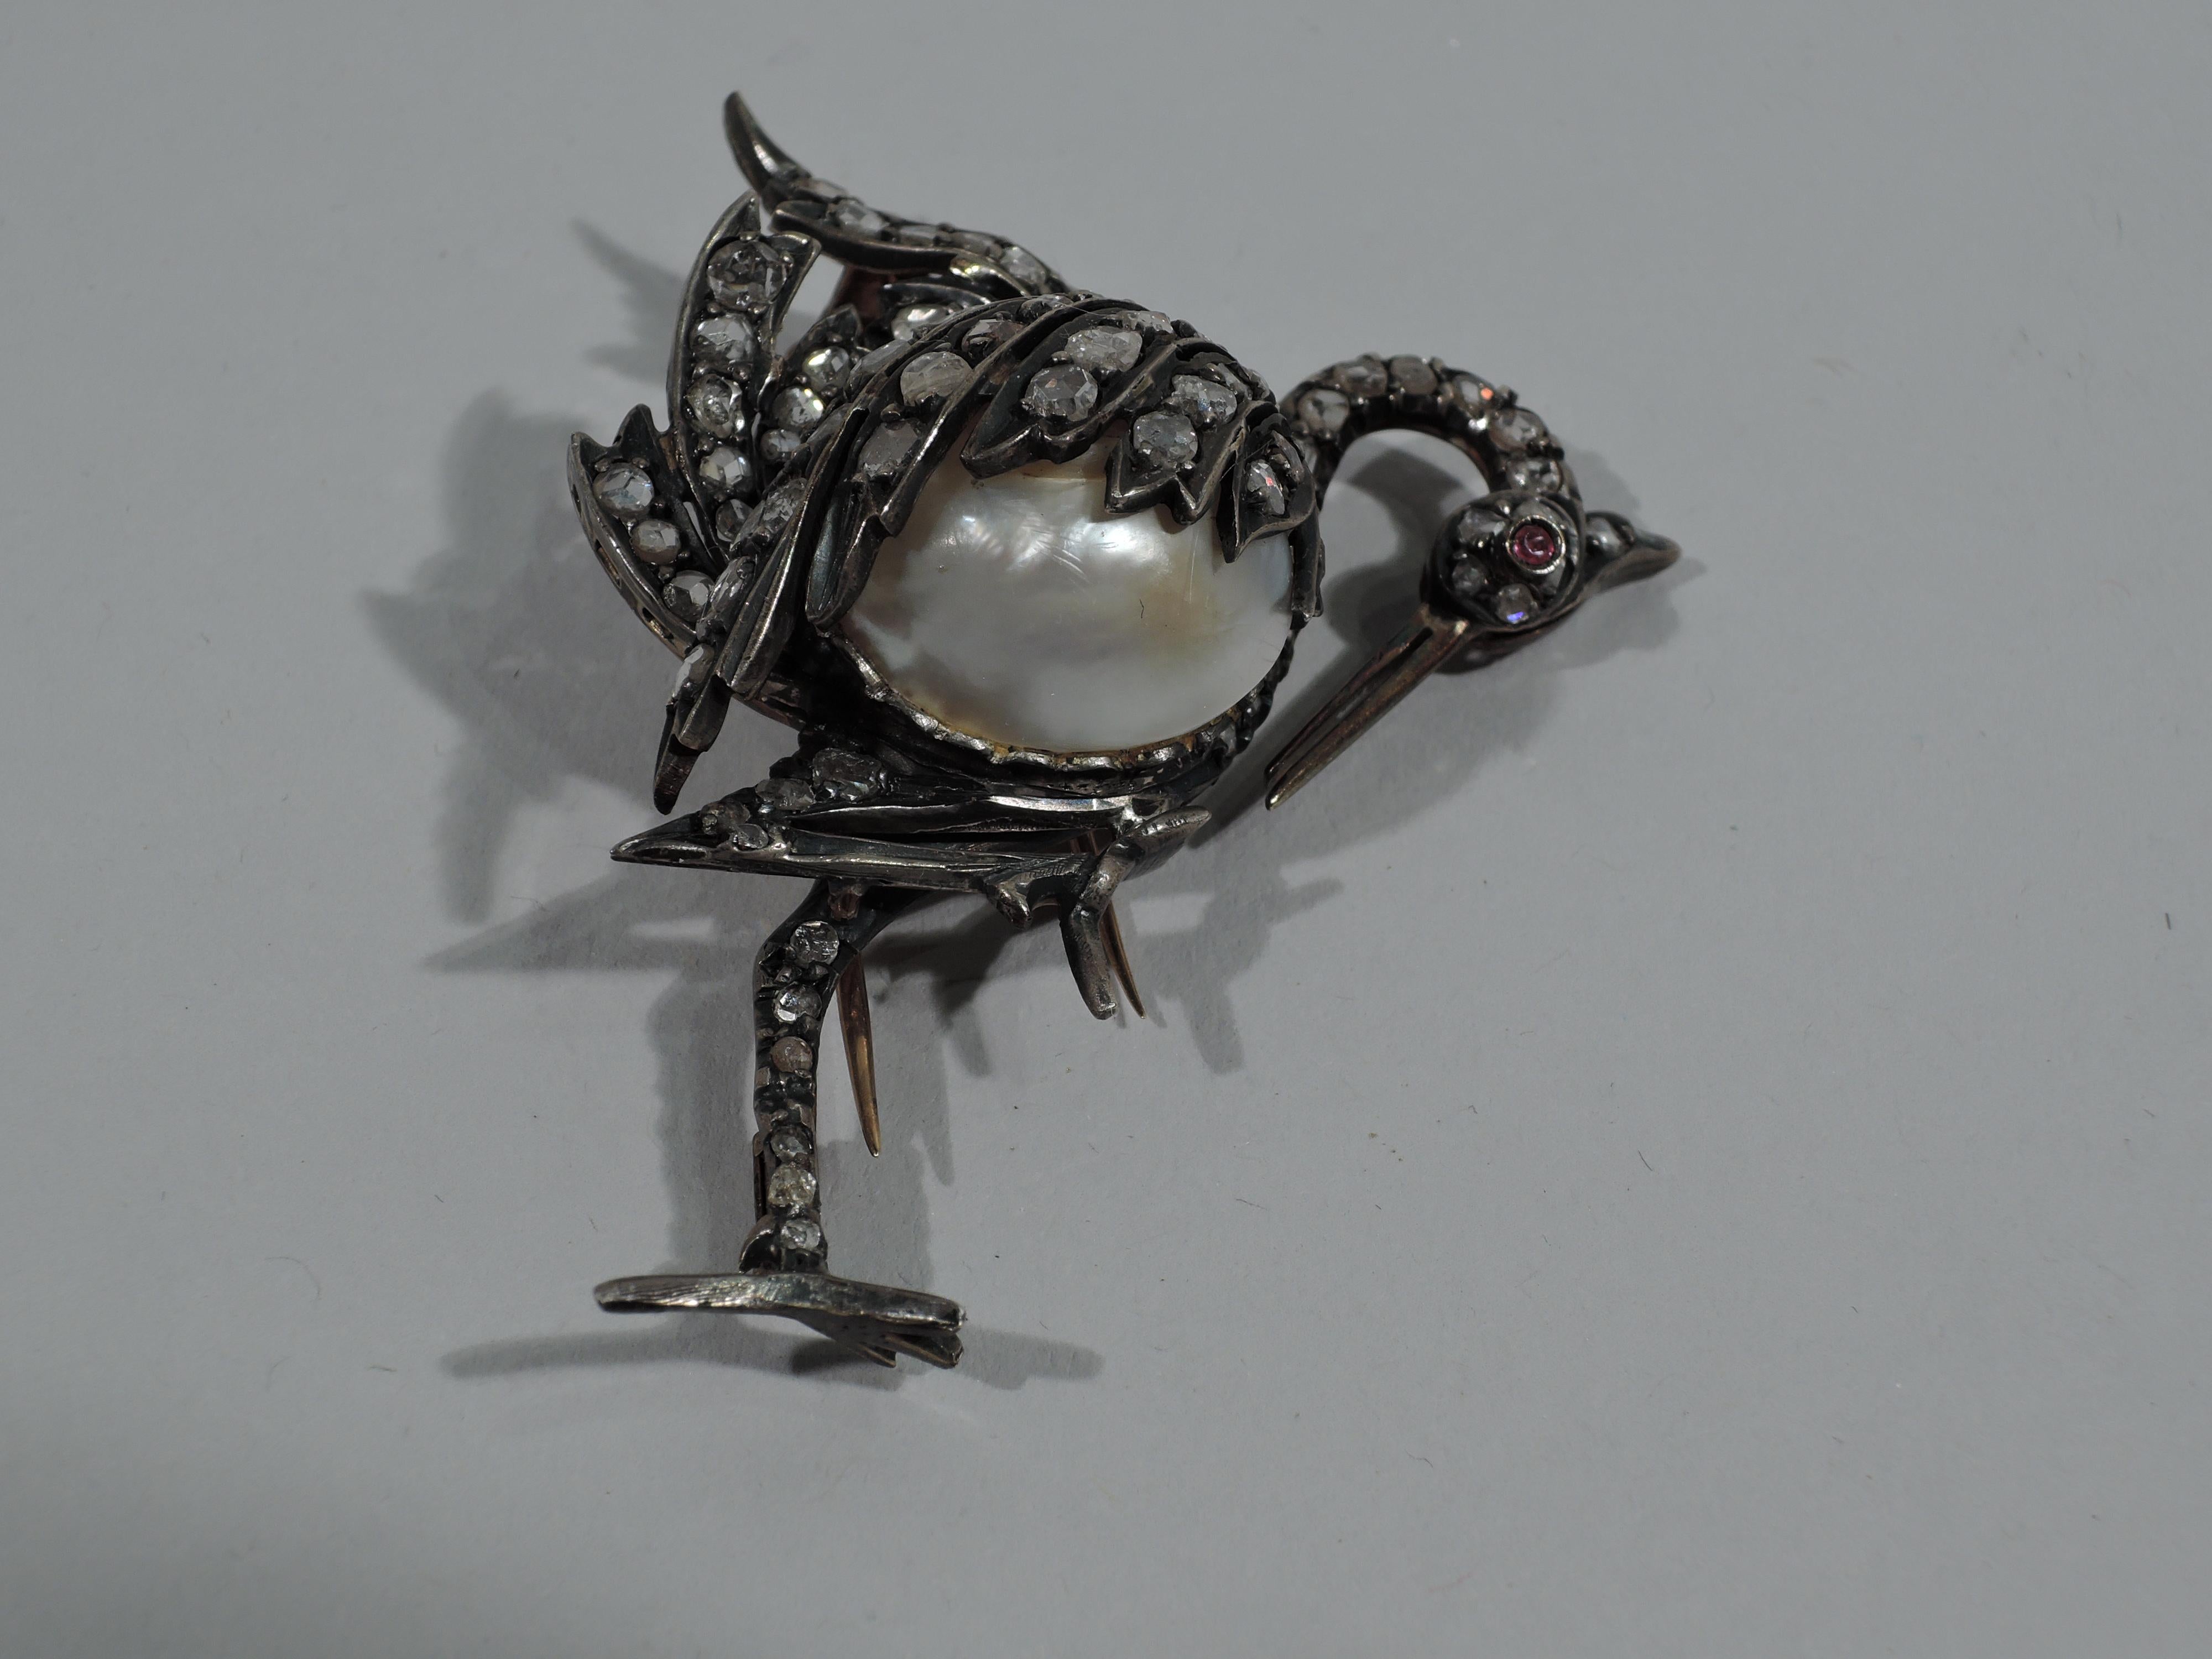 Delightful figural silver brooch in form of stork with natural Baroque pearl body and approximately 100 inlaid rose-cut diamonds. Beak gold and eye cabochon ruby. Gold back. England, ca 1880.  

Dimensions: H 2 1/4 x W 2 1/4 in. Pearl: D (approx.) 1